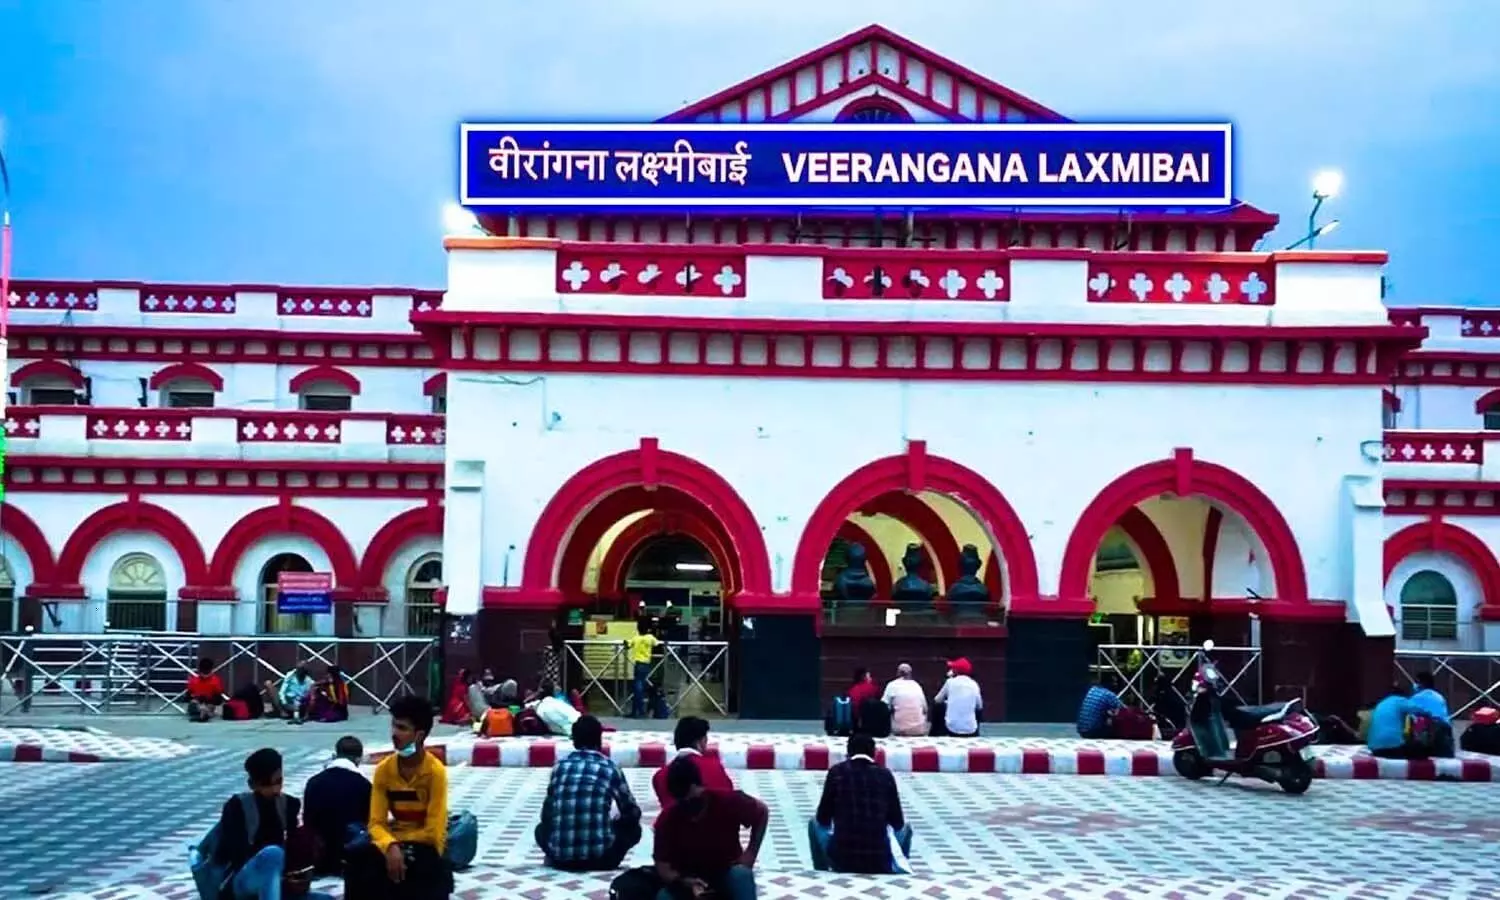 Jhansi railway station is now Veerangana Laxmibai Junction, being equipped with state-of-the-art design